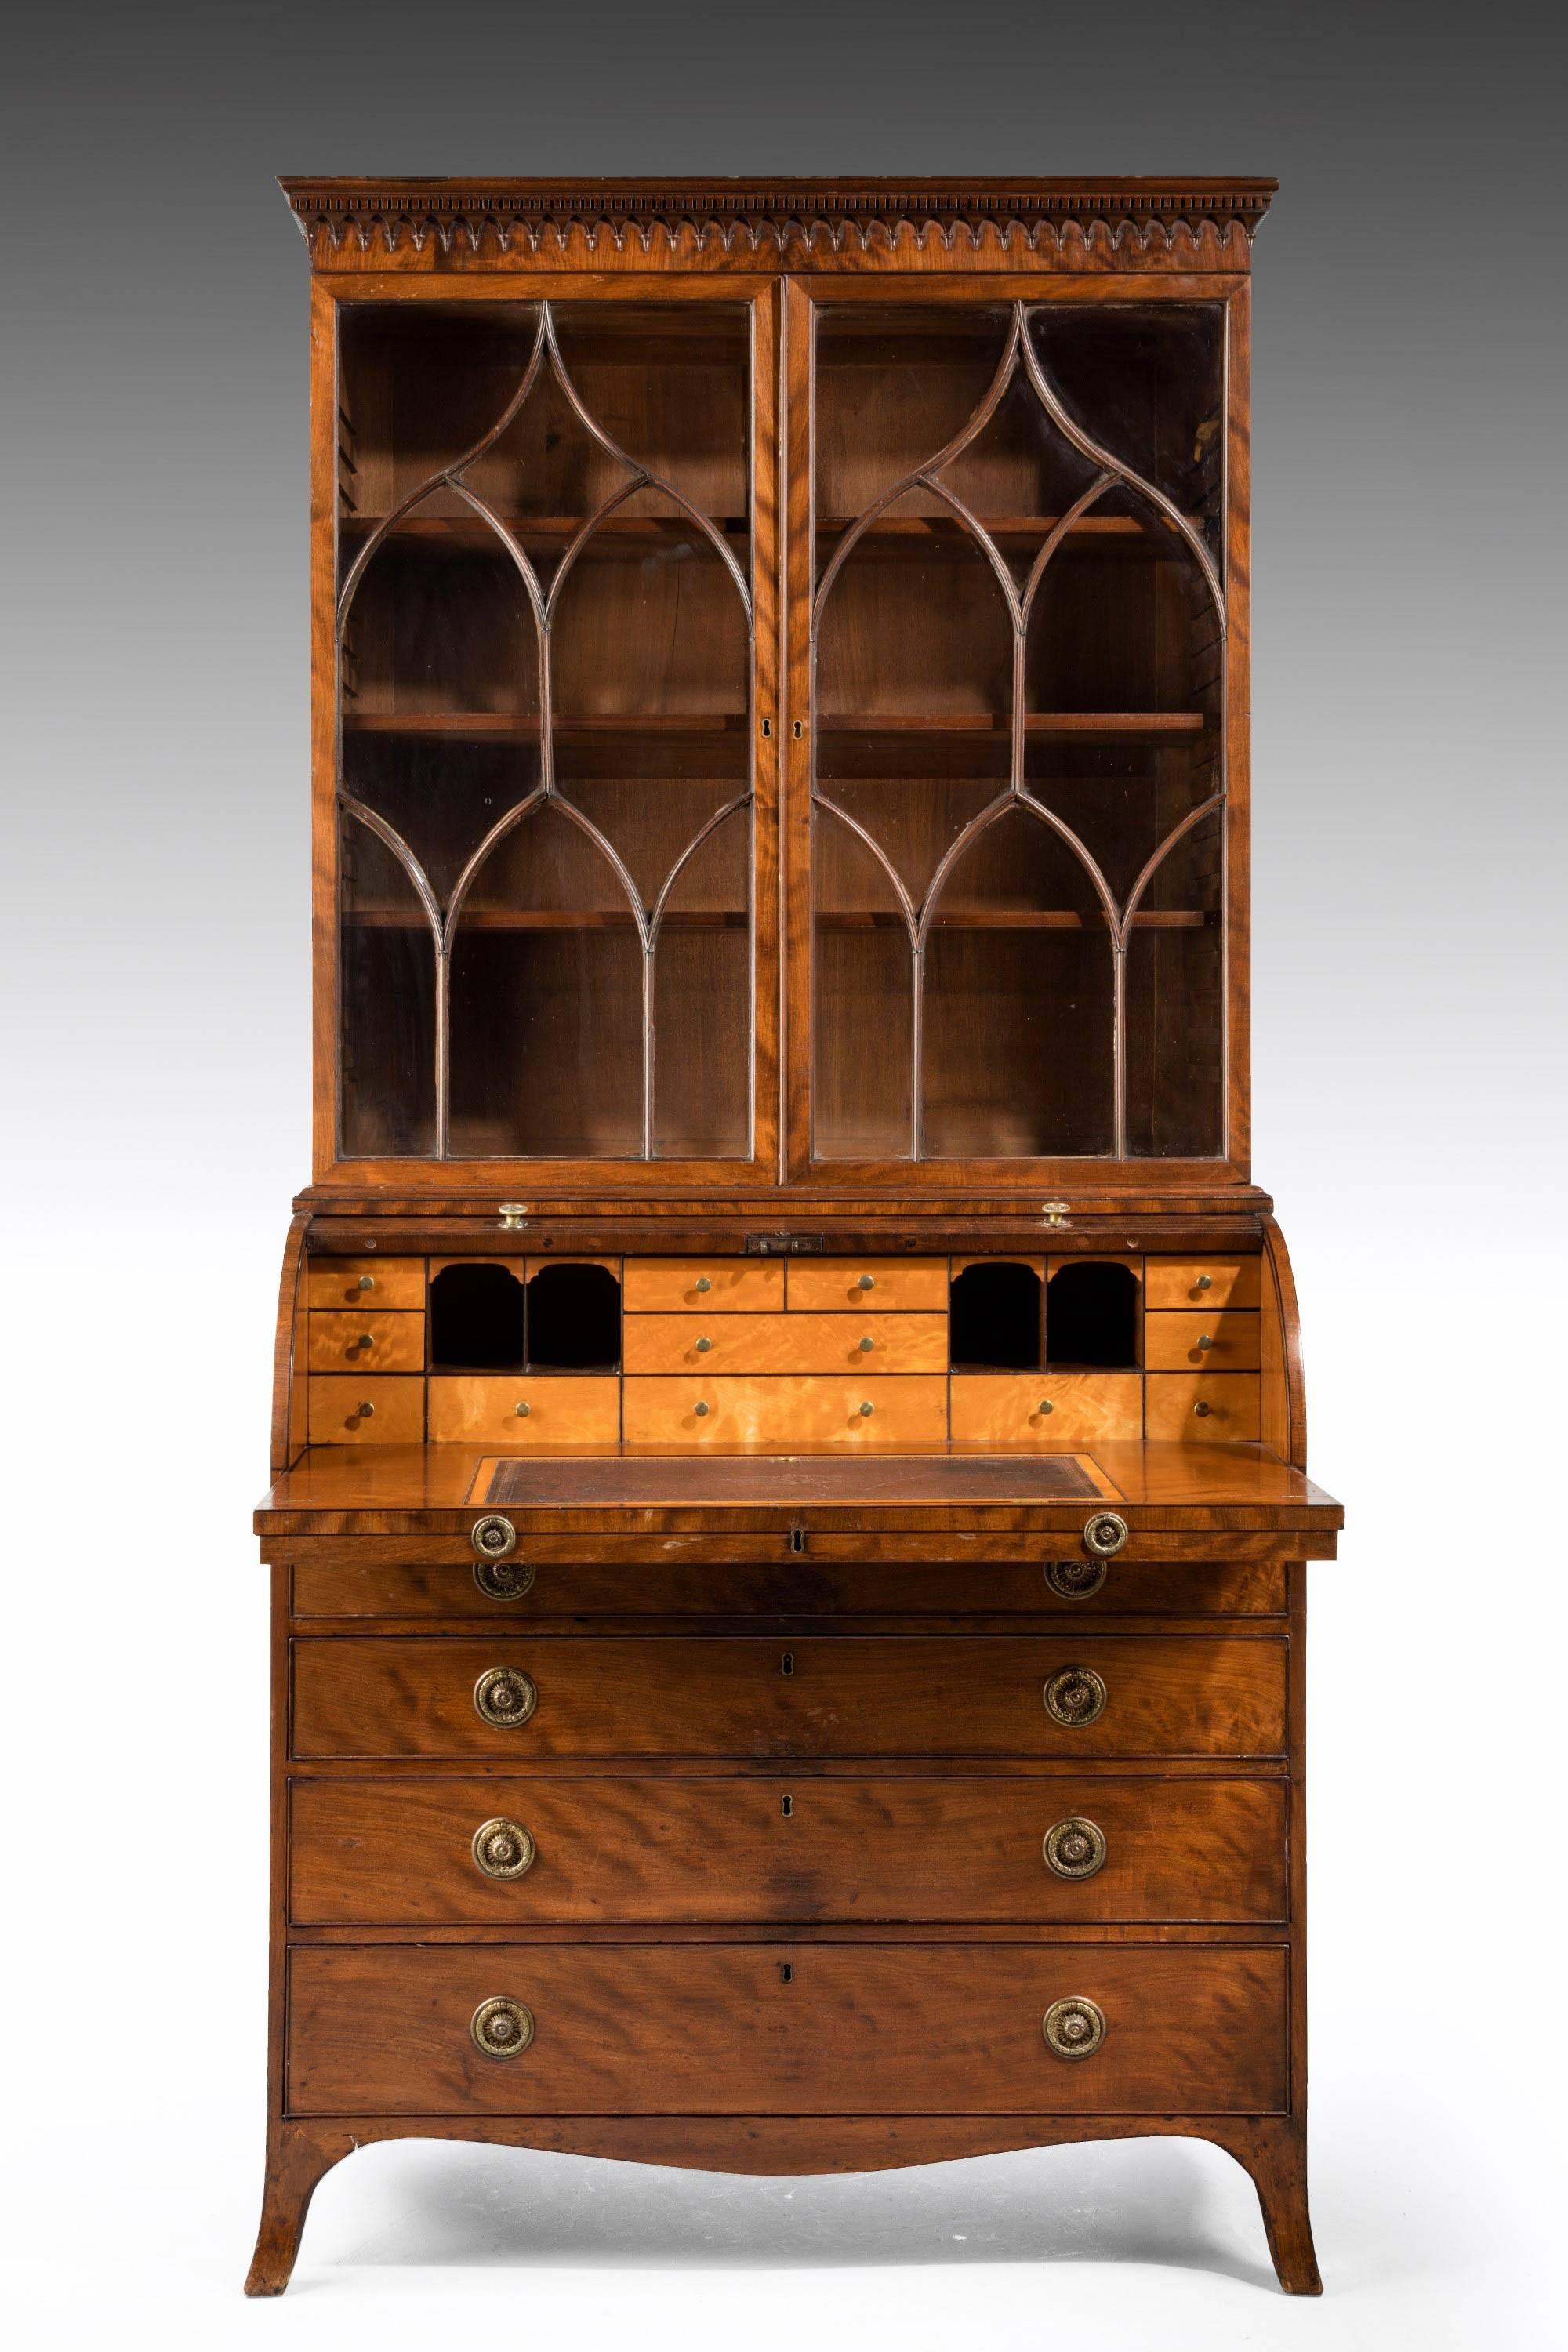 A quite exceptional George III period cylinder secretaire bookcase with fine Gothic tracery to the glazed doors.